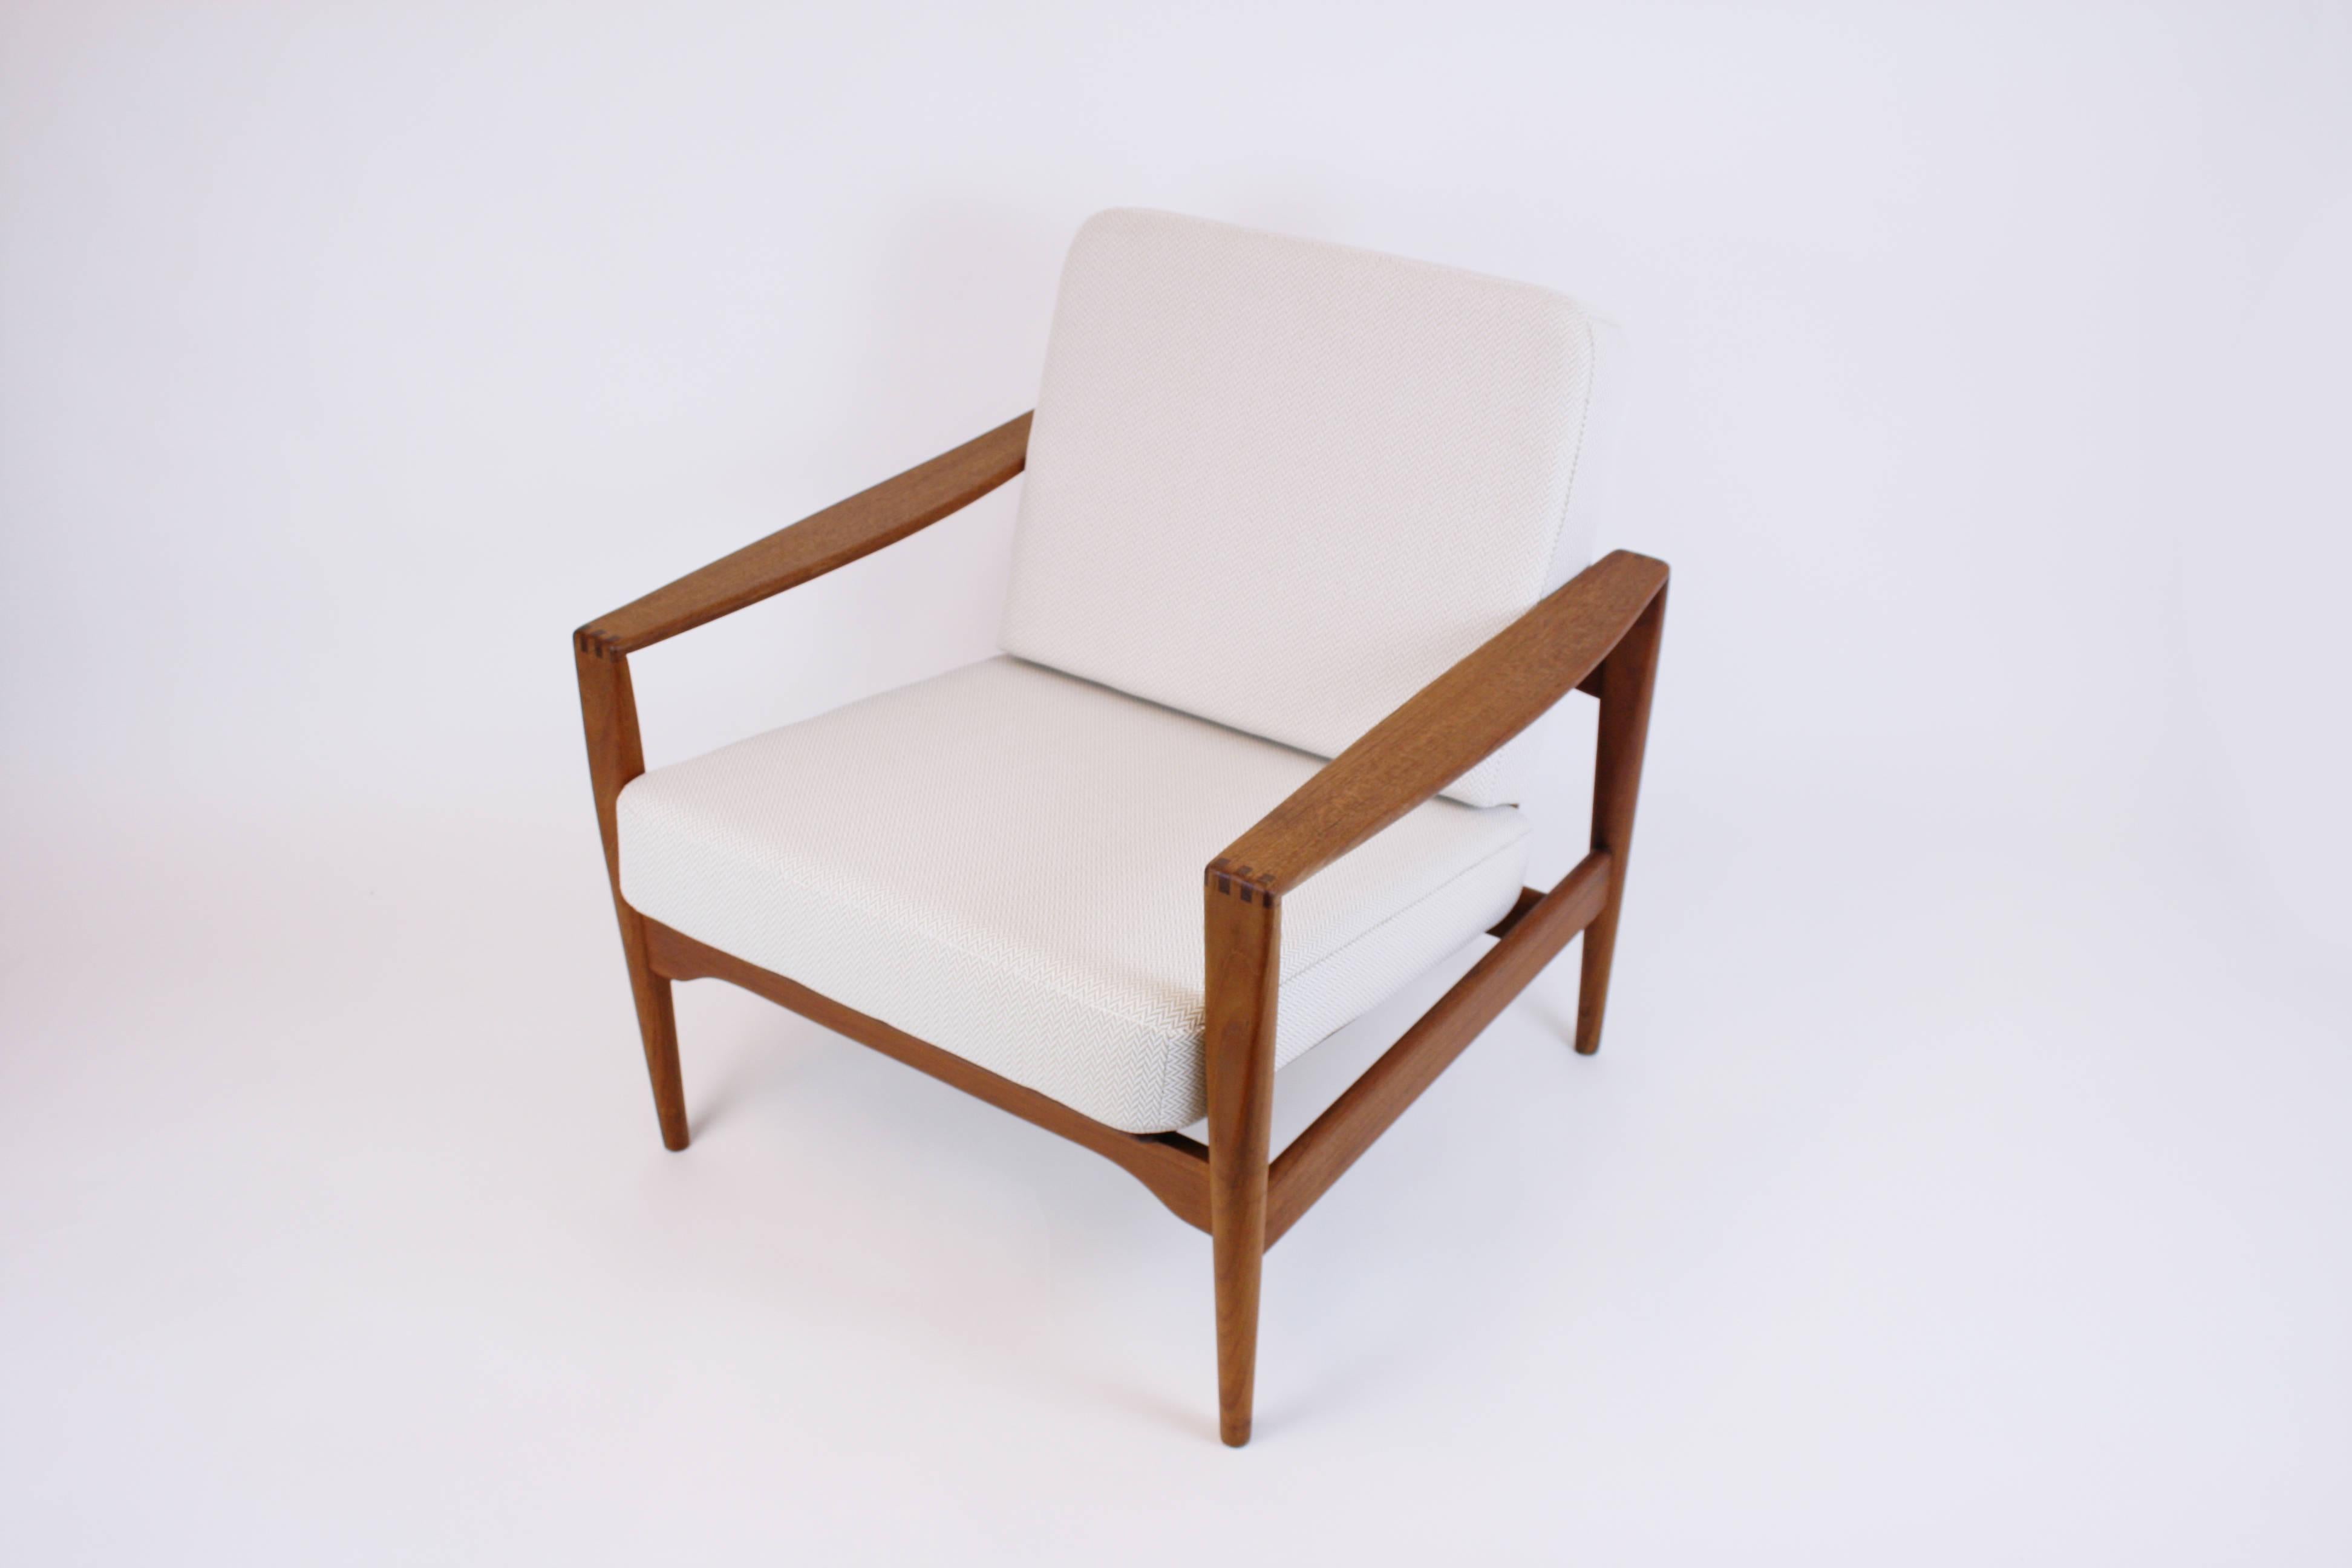 Armchair or lounge chair by Arne Wahl Iversen manufactured in Denmark during the 1960s. This very nice object offers an unmistakeable and elegant look. Its upholstery covers were refurbished considering the authentic visual appearance but equipped